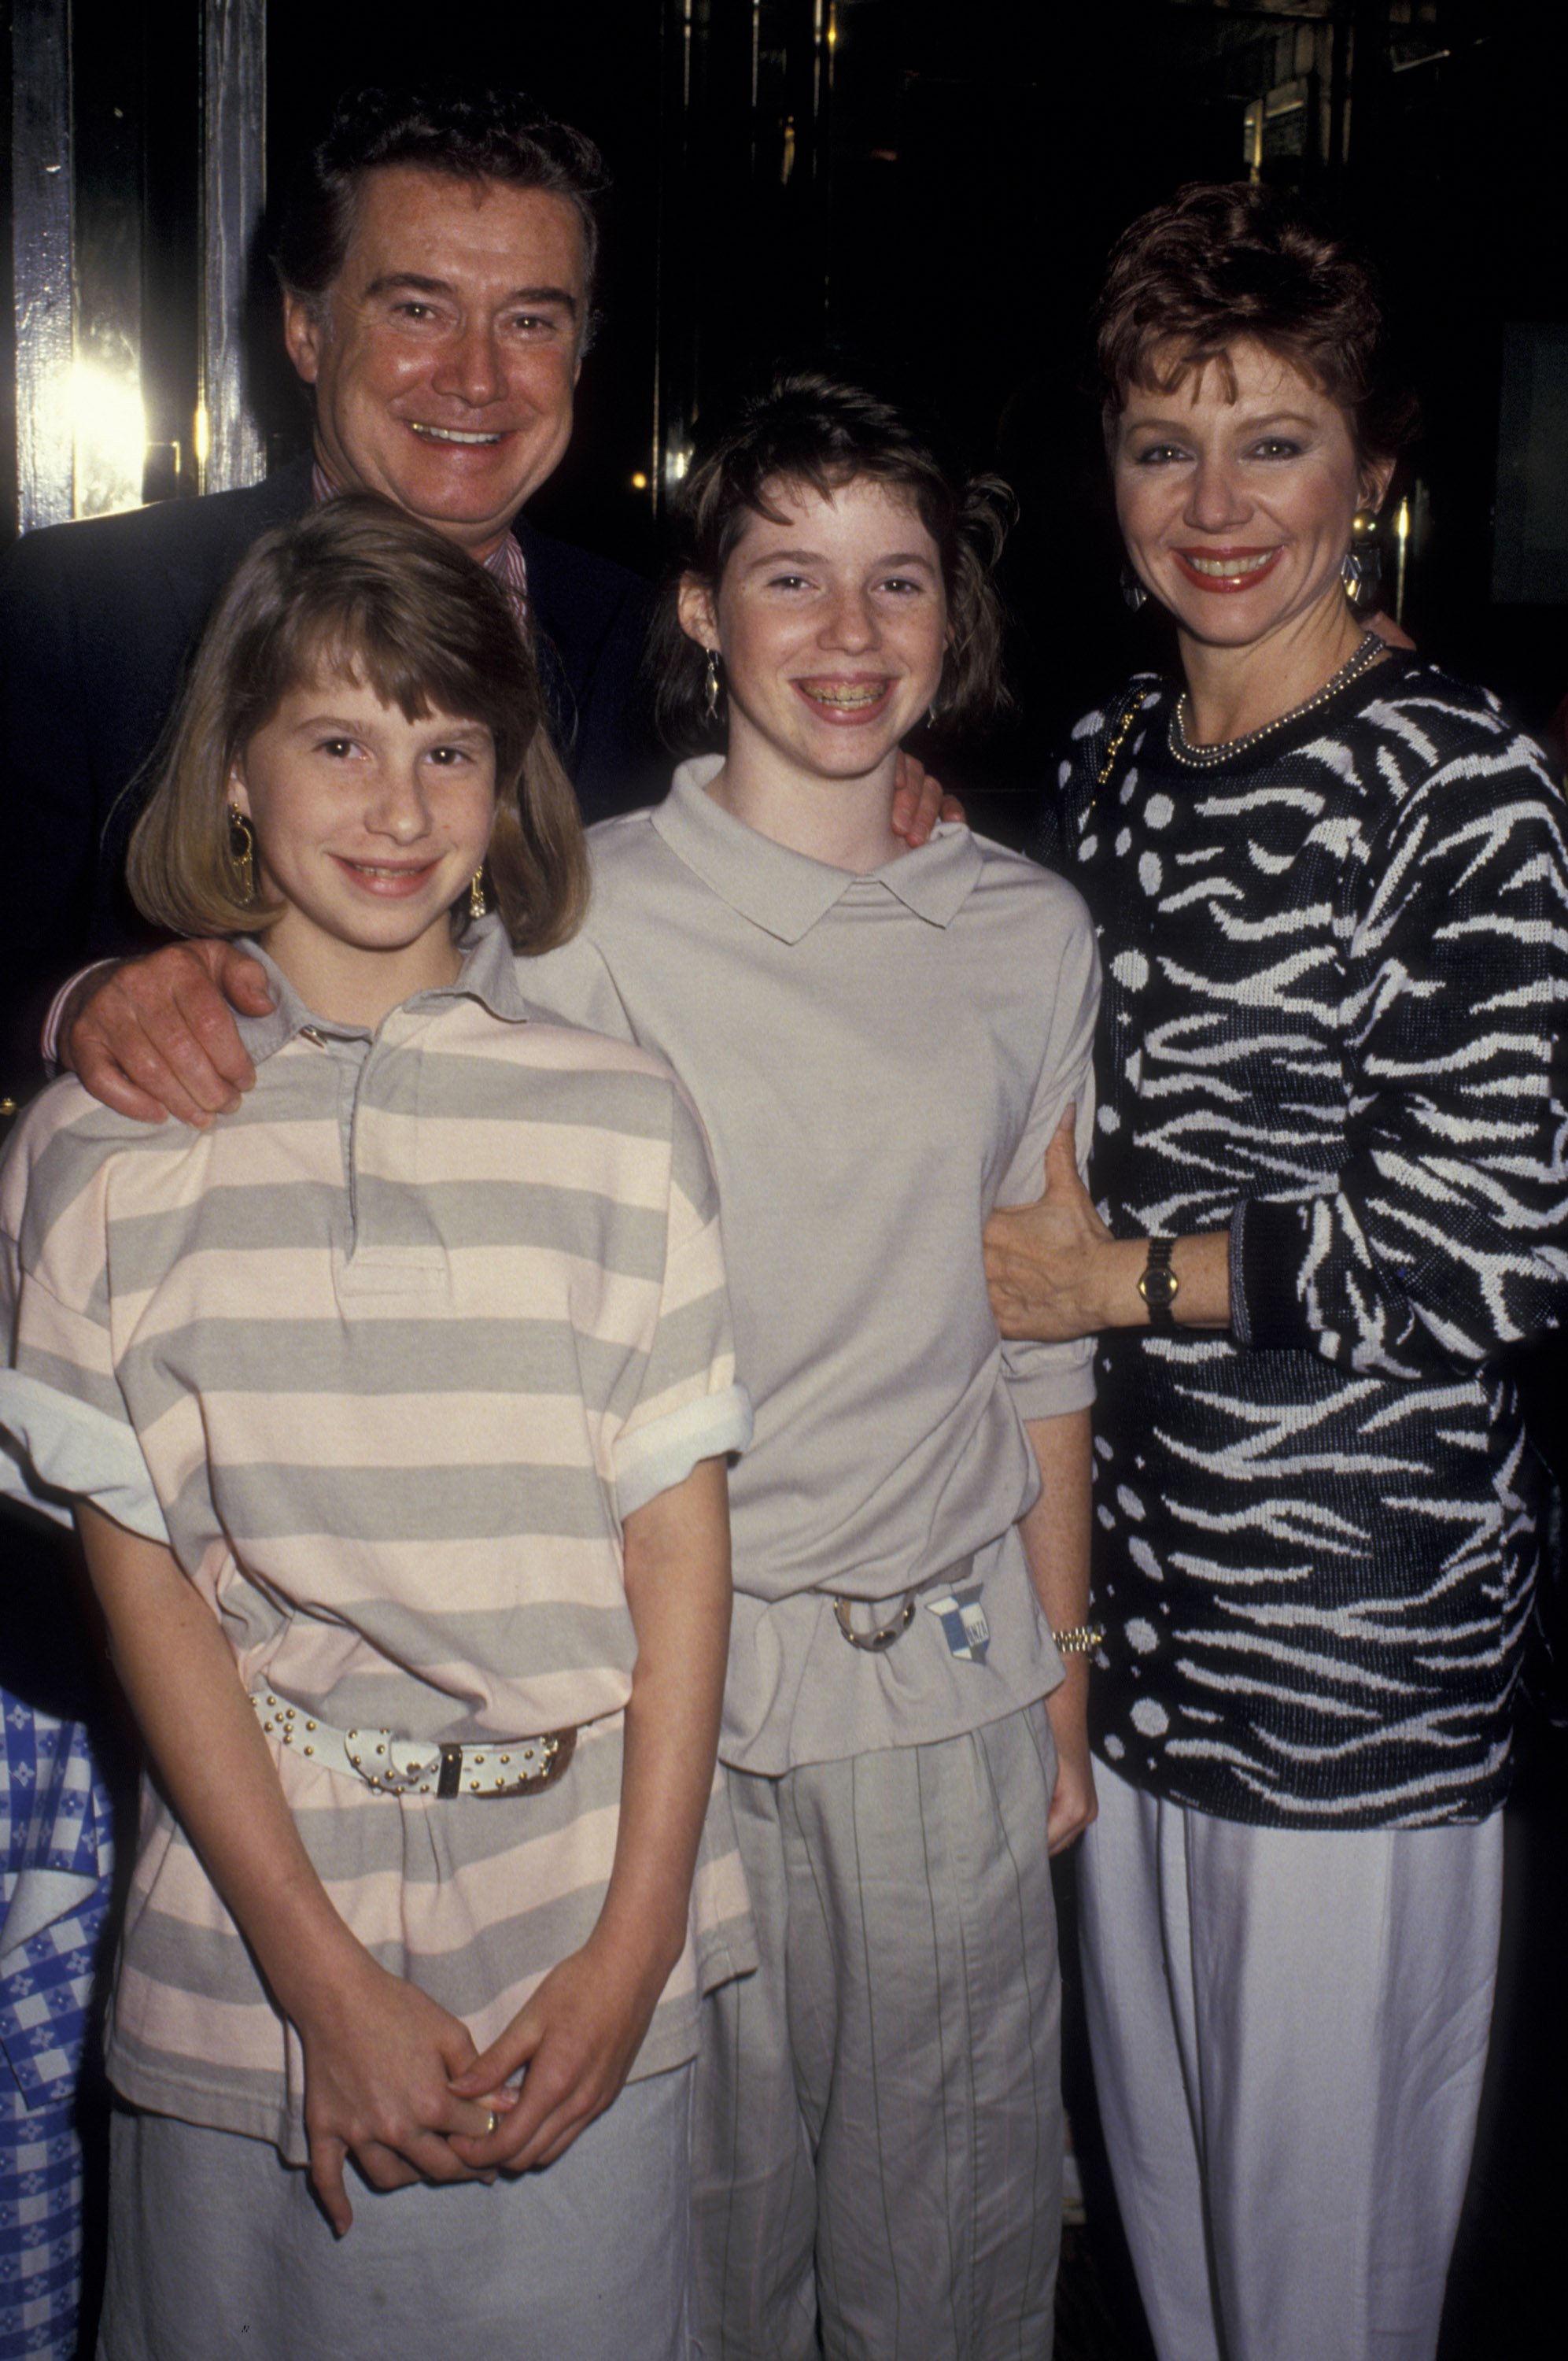 Regis and Joy Philbin with daughters Joanna and Jennifer attend the premiere of "The Monster Squad" in New York City on June 3, 1987 | Photo: Getty Images